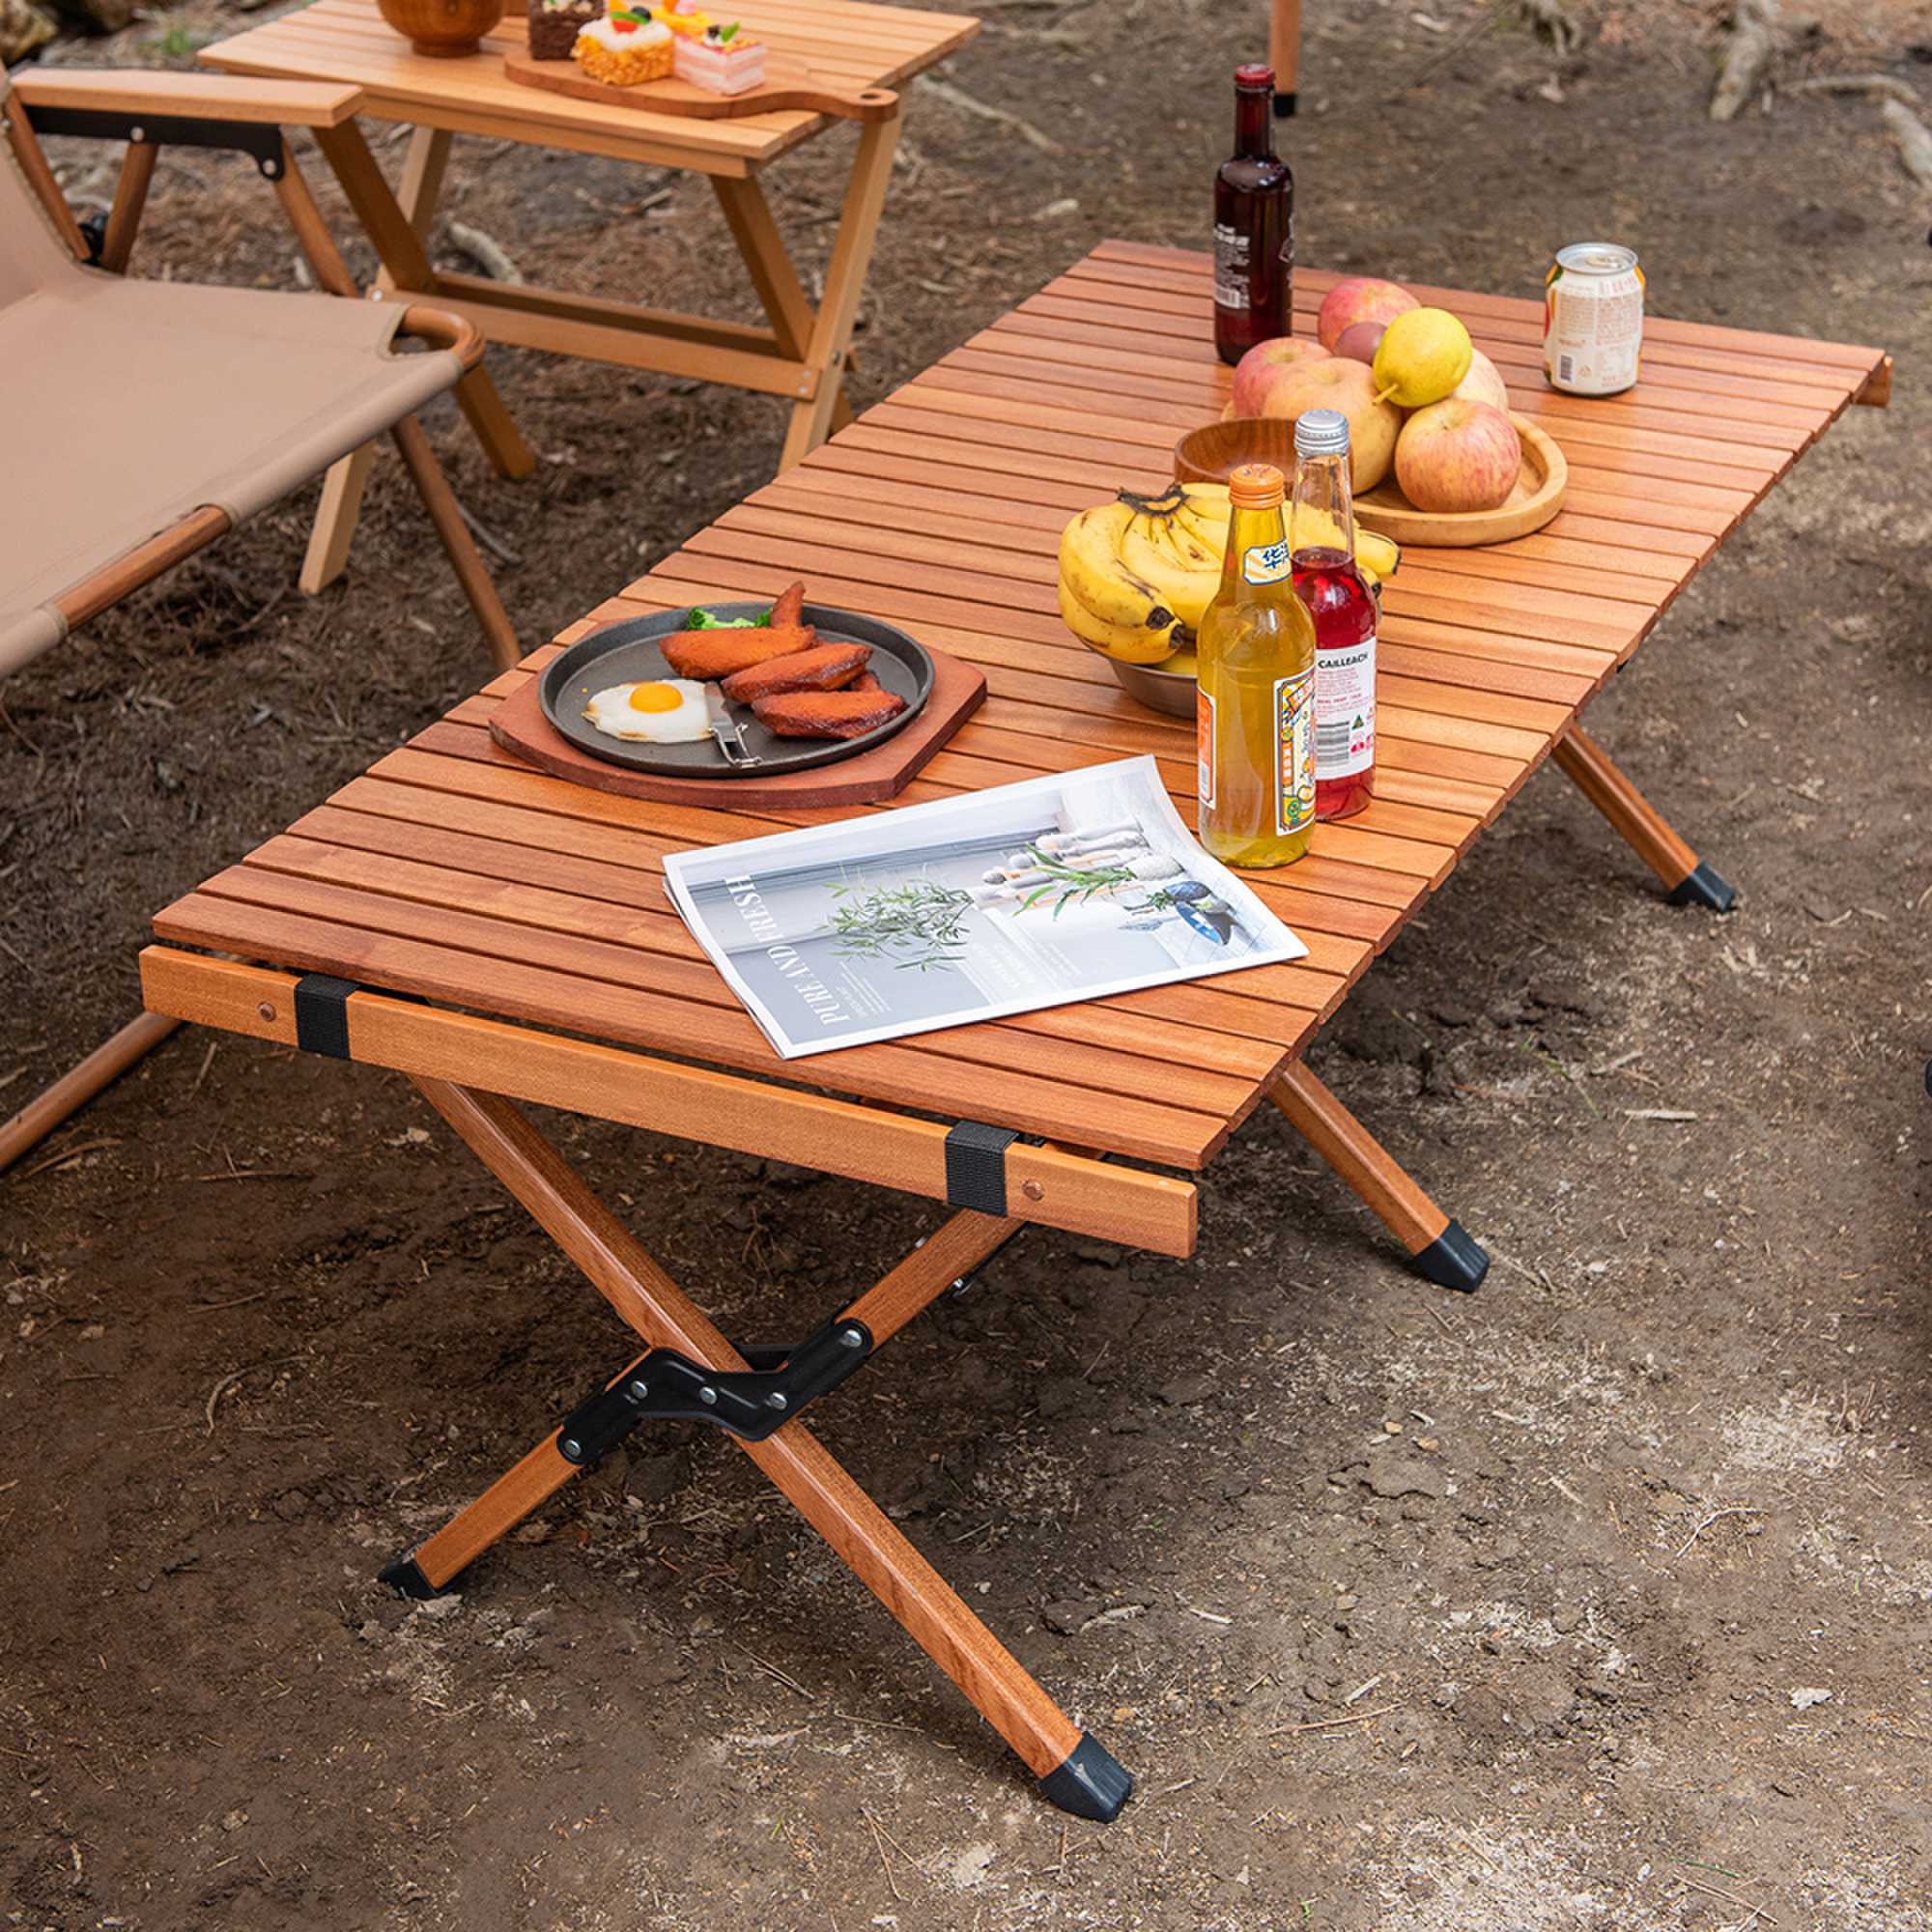 Picnic roll table